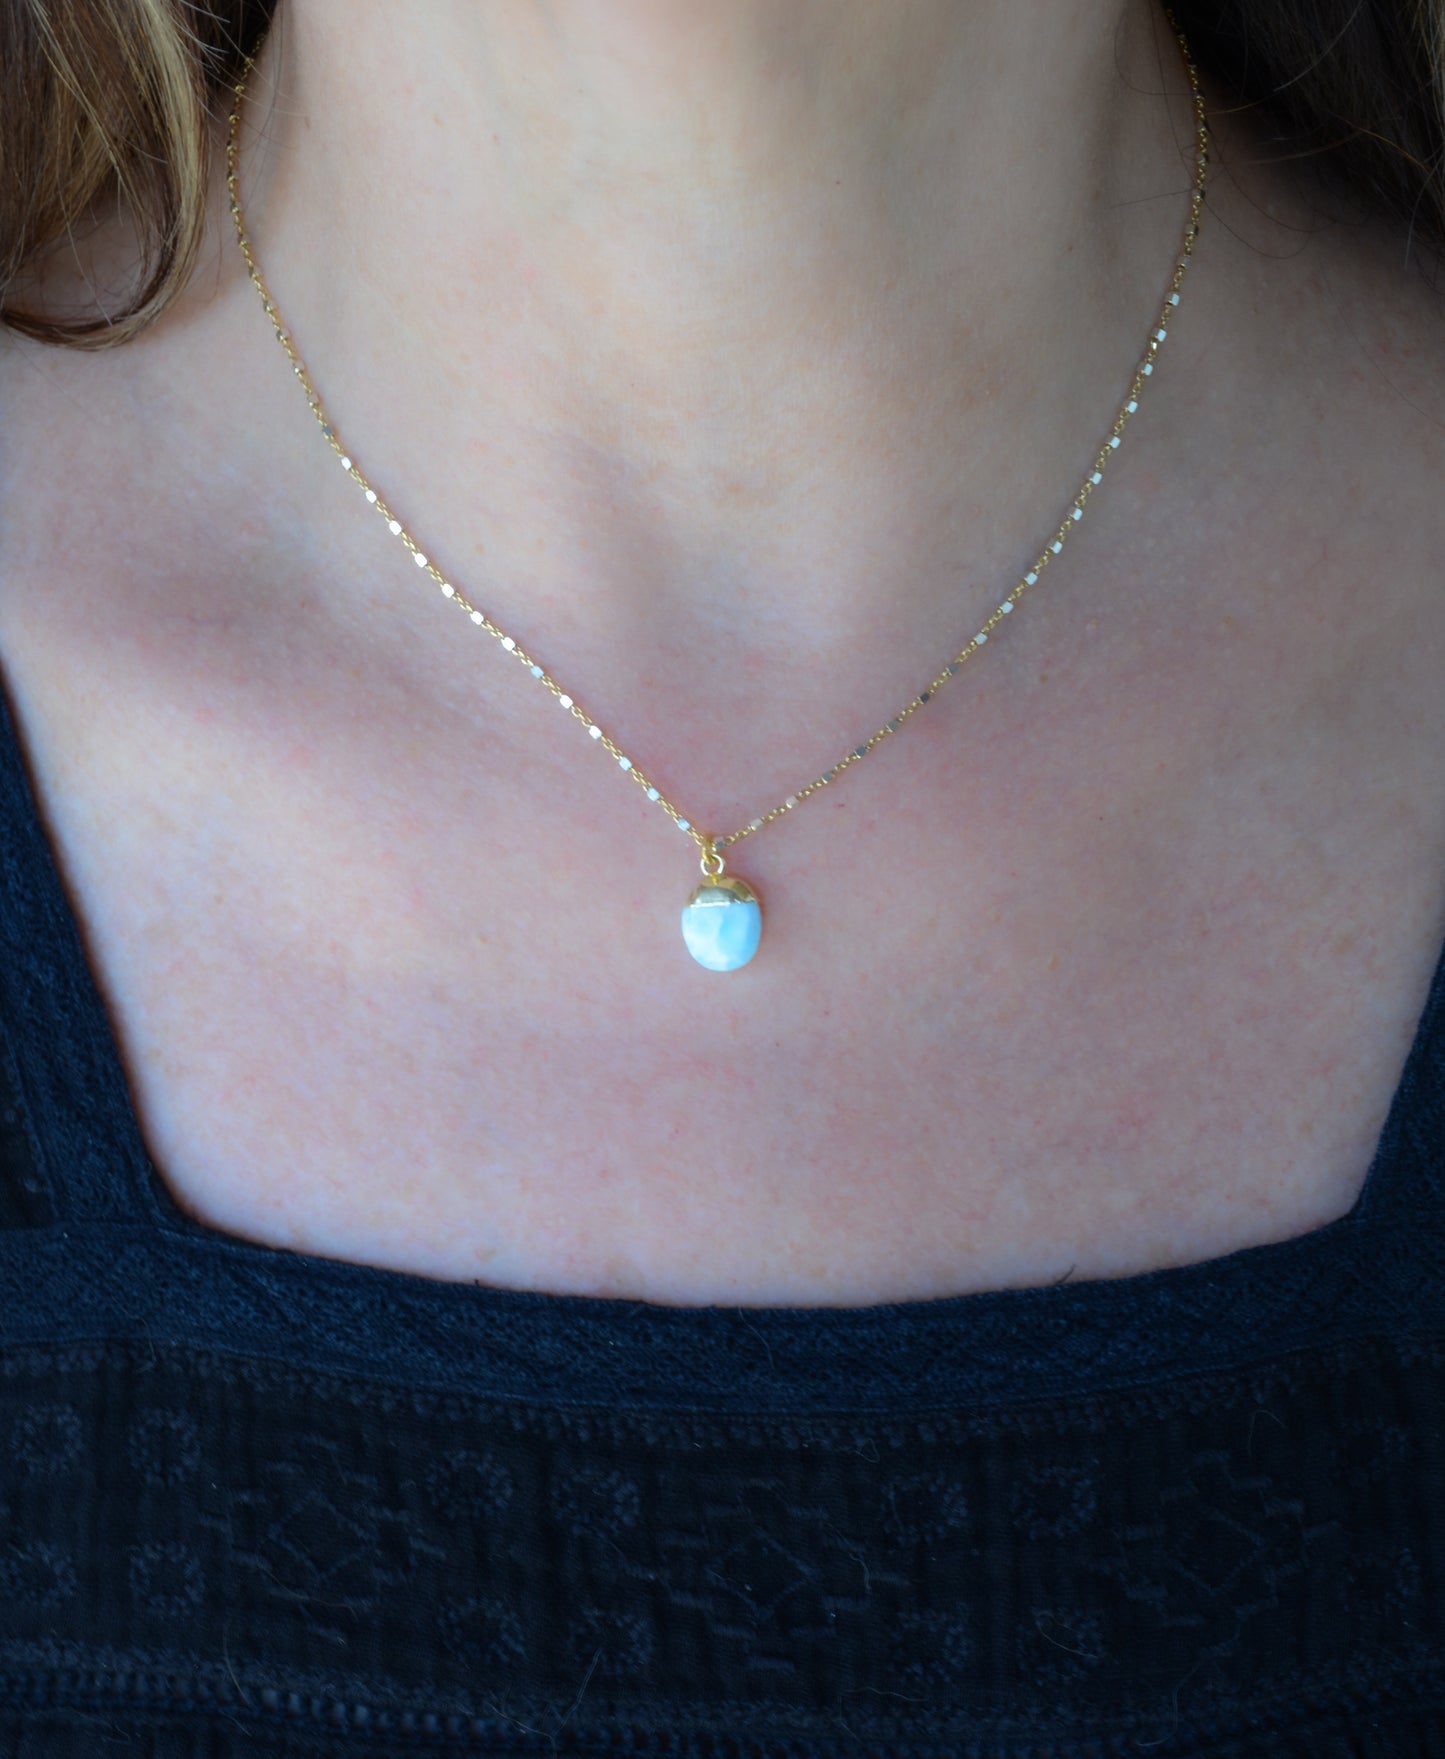 Two-Tone Silver Necklace with Larimar Pendant